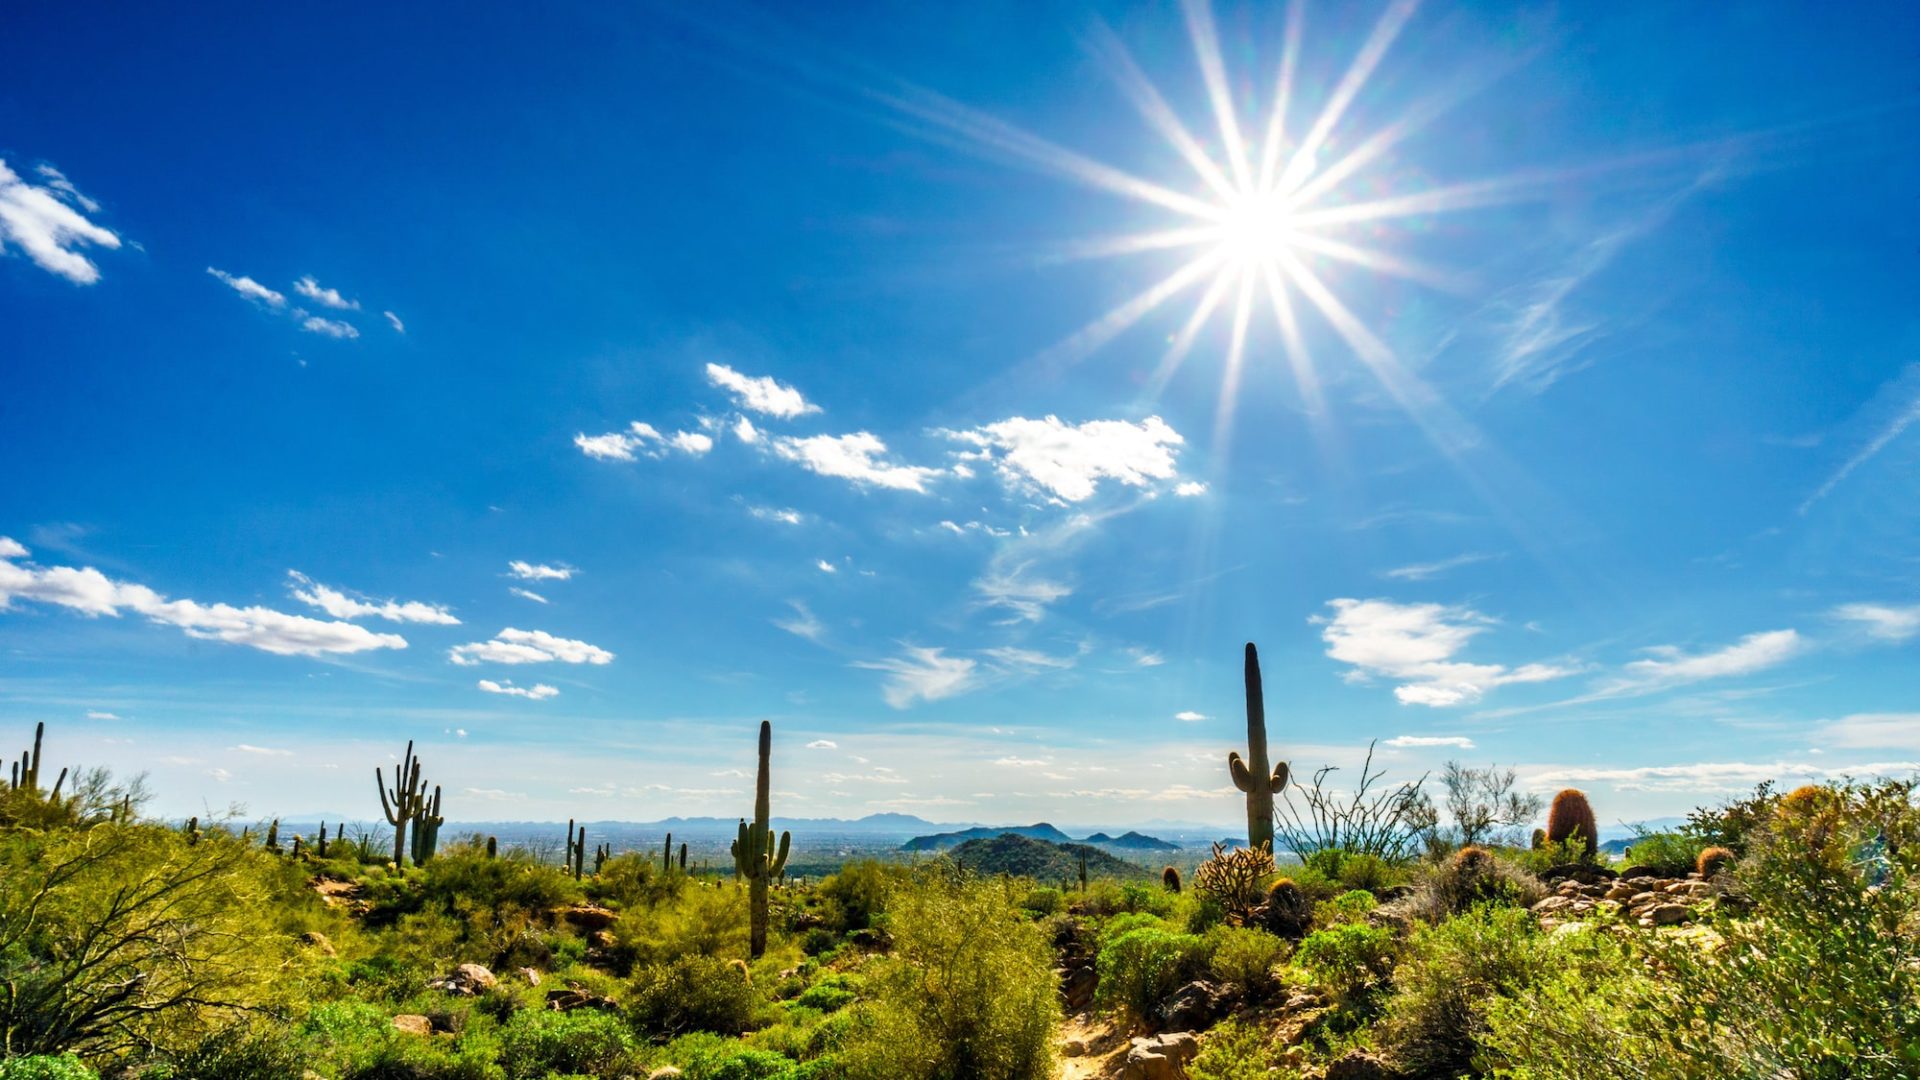 The sun shining in a blue sky overlooking a green desert with cacti, near the neighborhoods that HomeQwik provides Arizona property management 